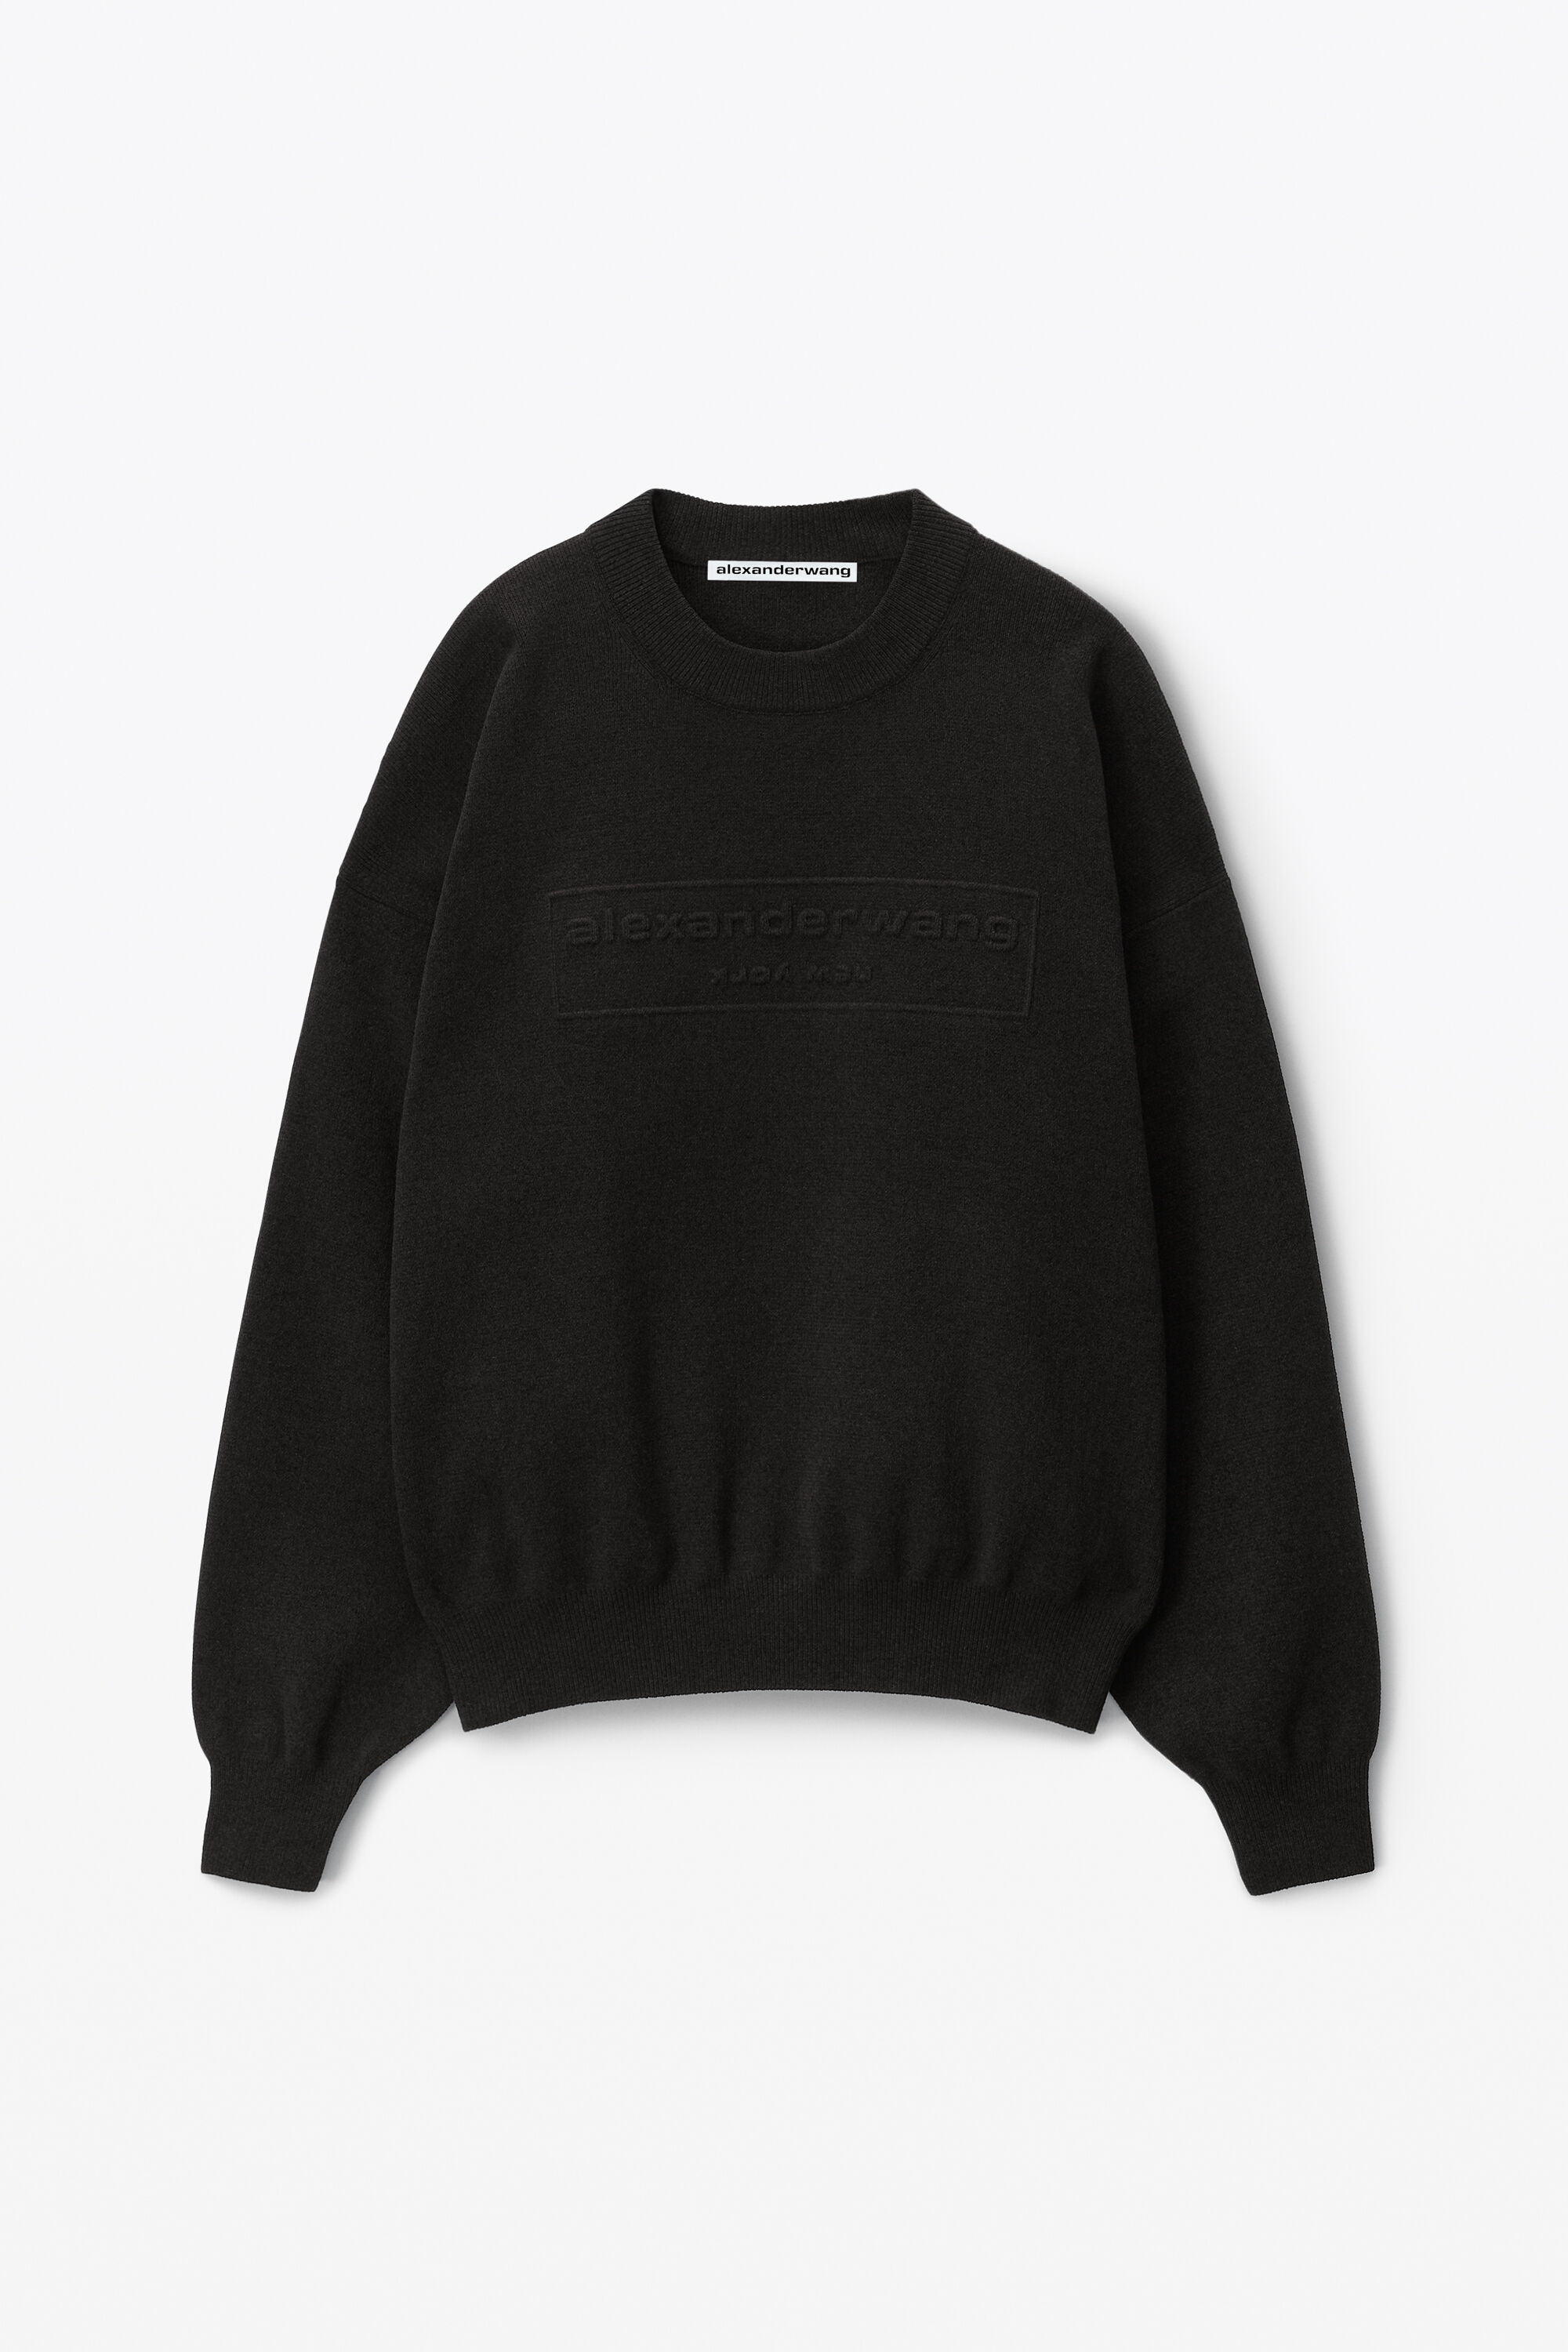 alexanderwang PULLOVER SWEATER IN RIBBED CHENILLE